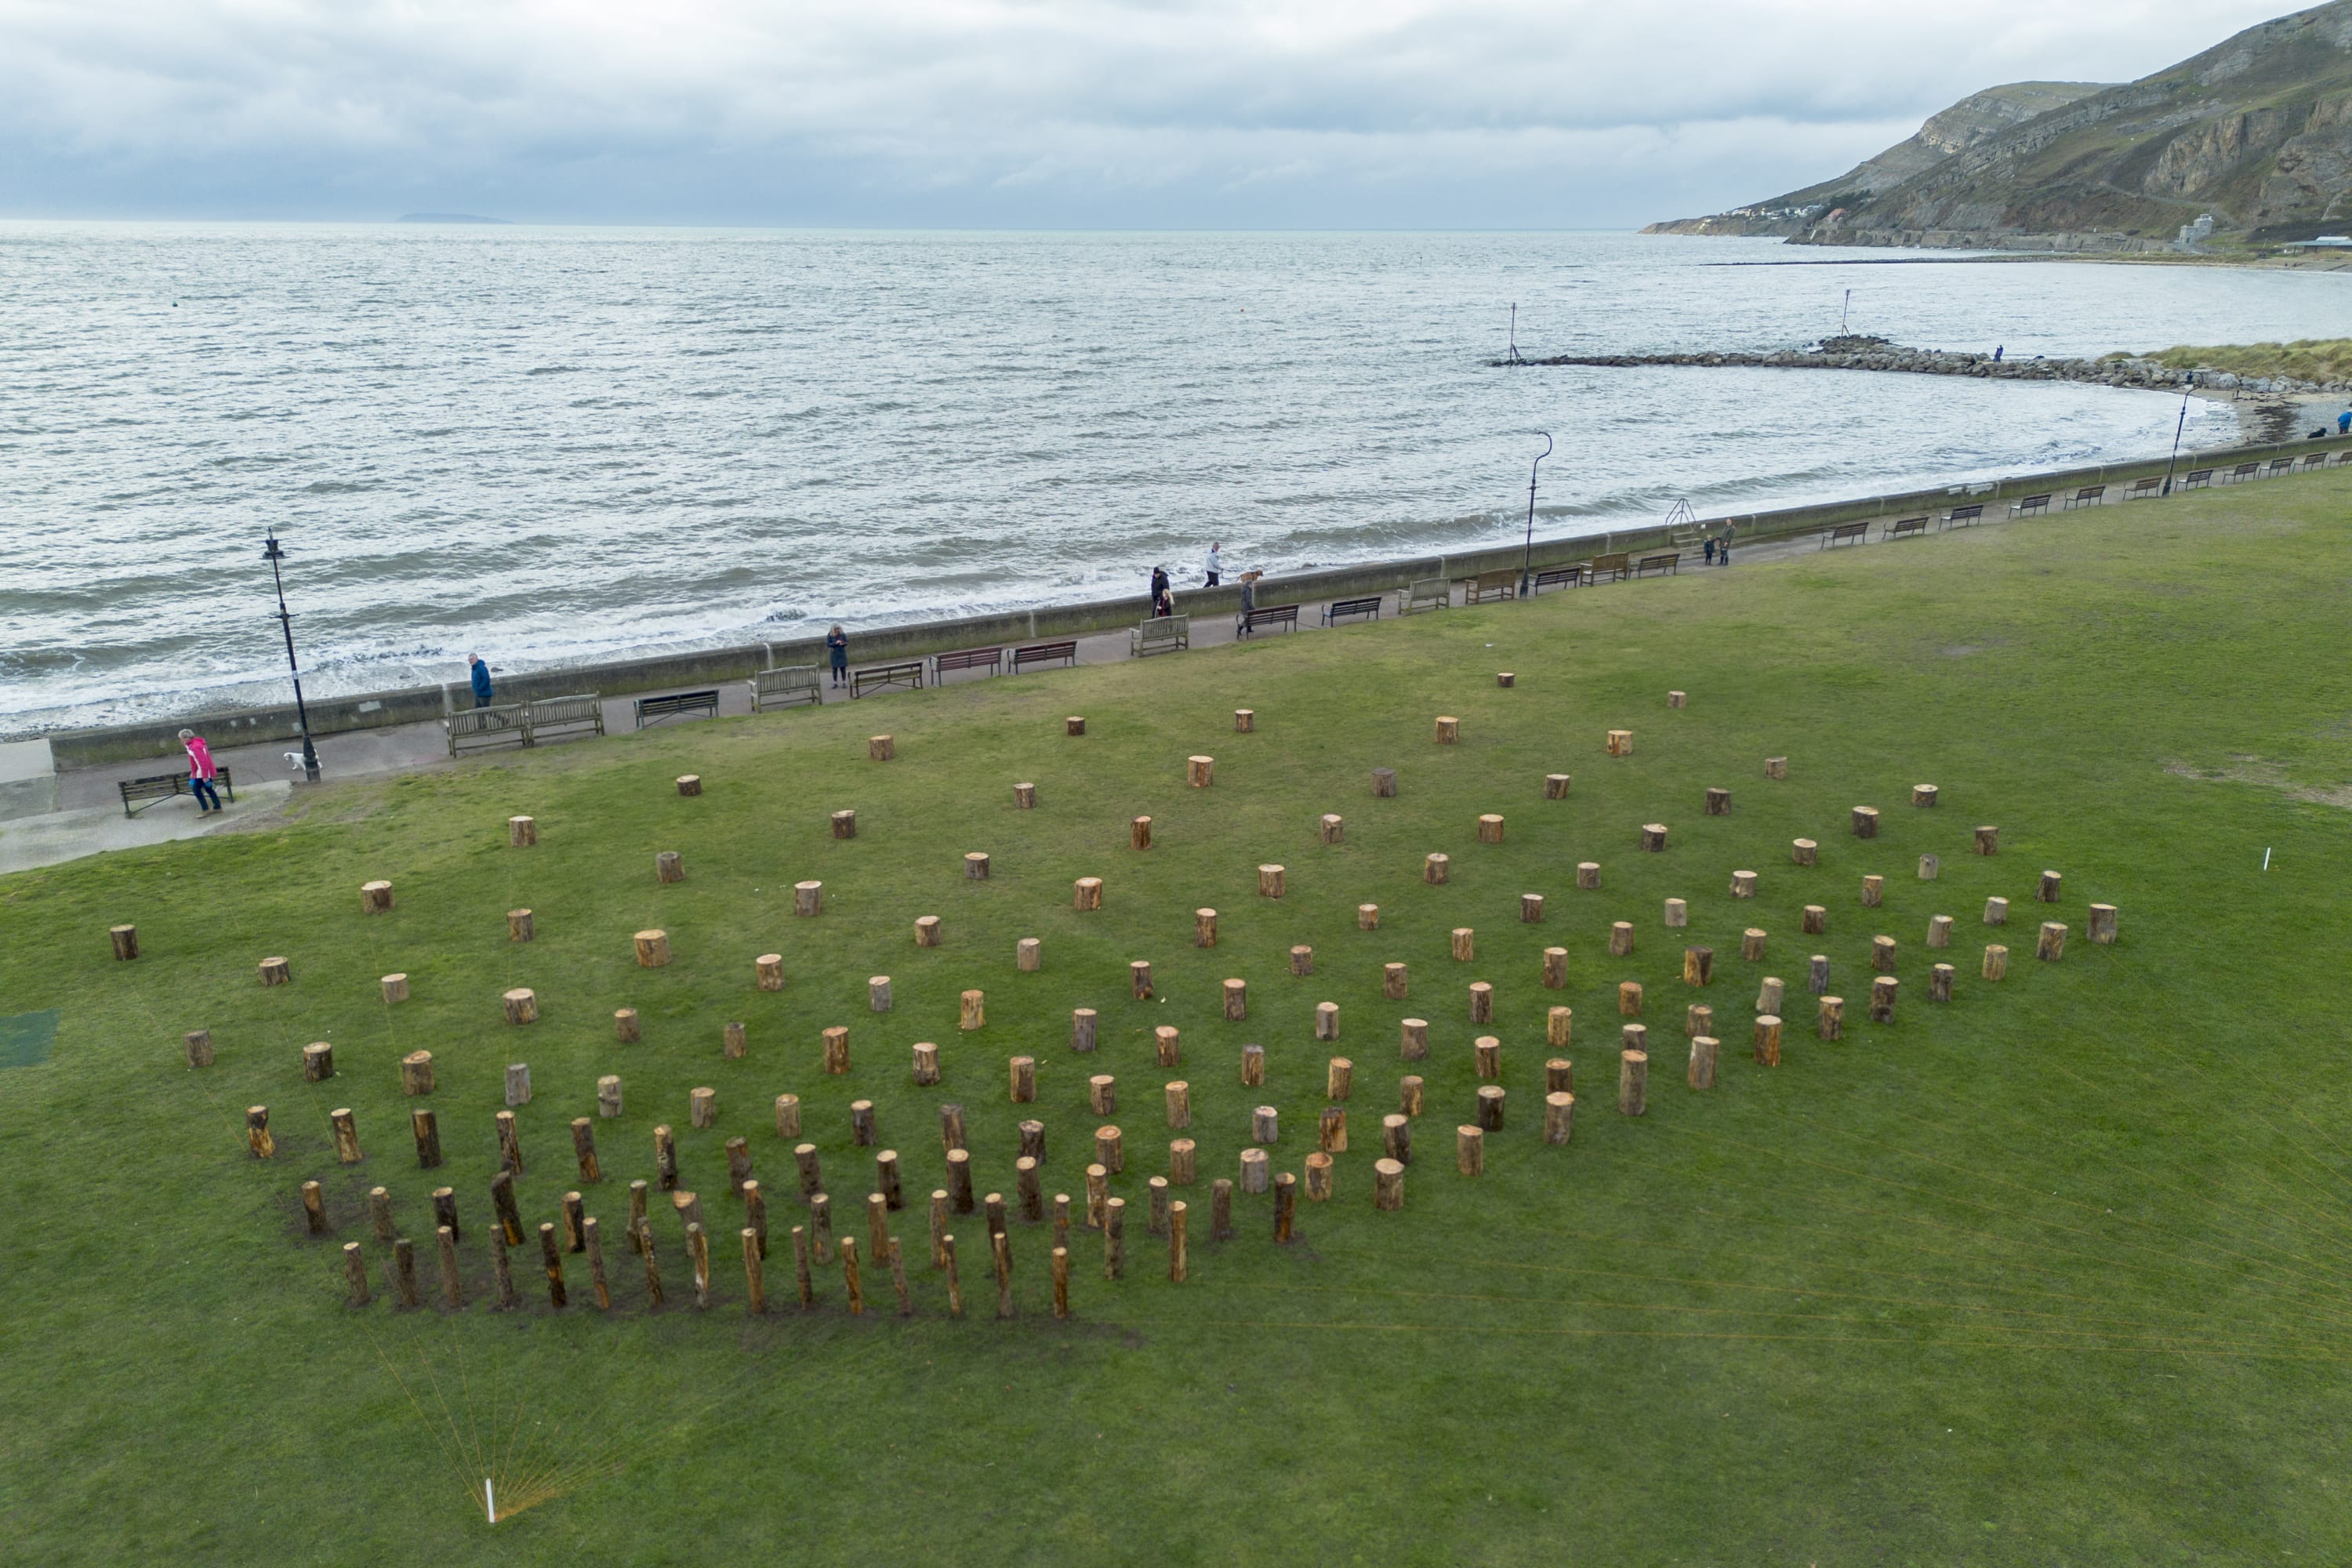 Rosemarie Castoro in The Guardian From New York to north Wales: artist’s field of logs recreated on Llandudno beach